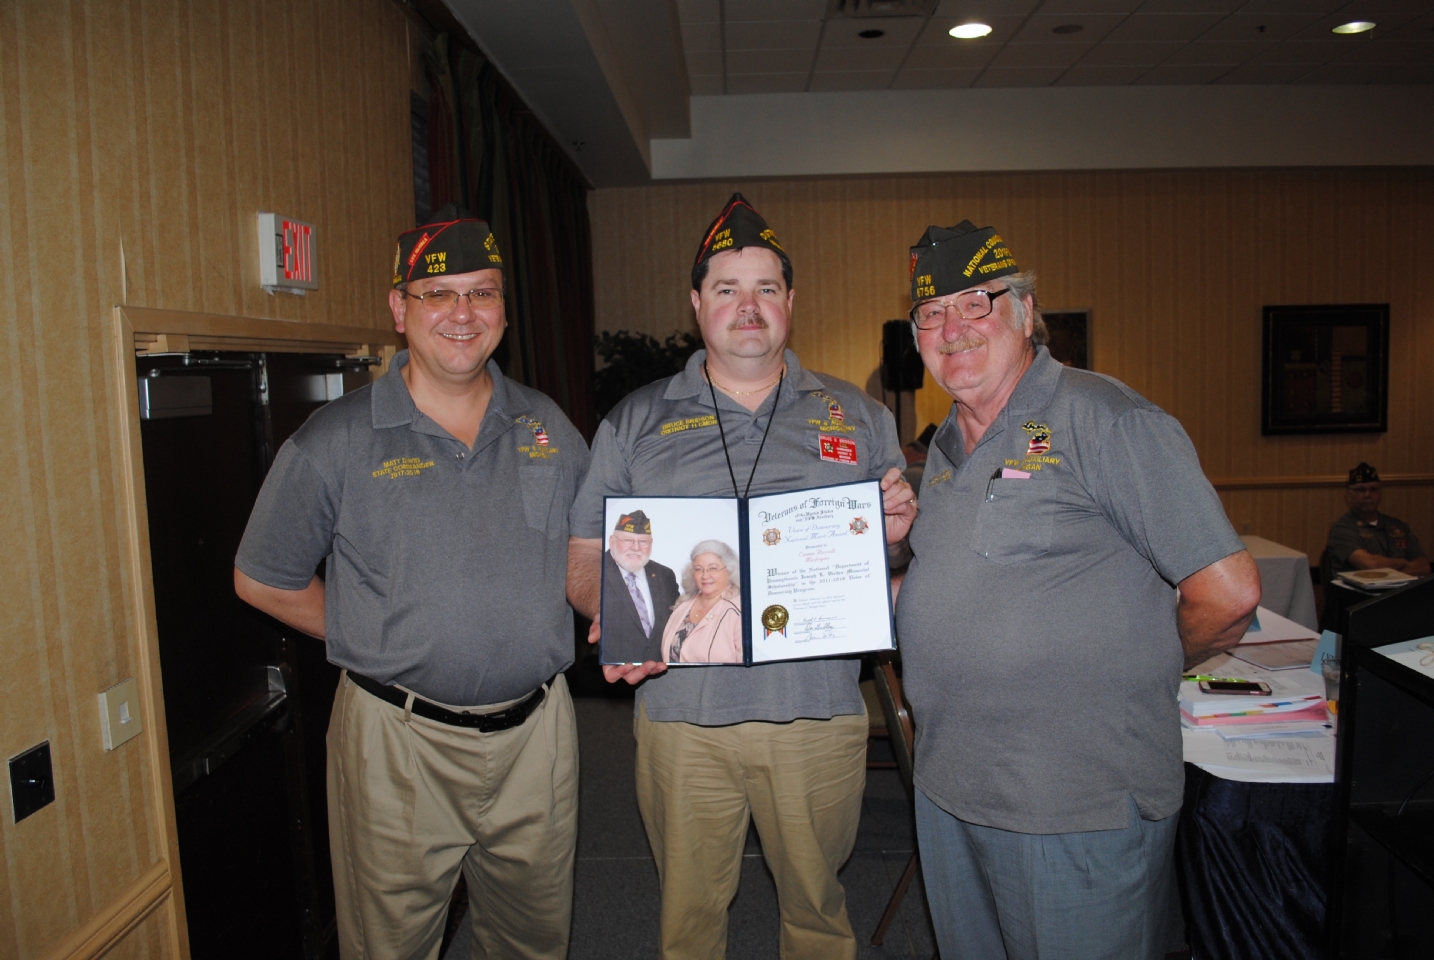 VFW Voice of Democracy National Merit Award presented to Emma Russell accepted by Bruce Birdson (c.) presented by Matt David (l.) and Harry “Les” Croyle (r.)